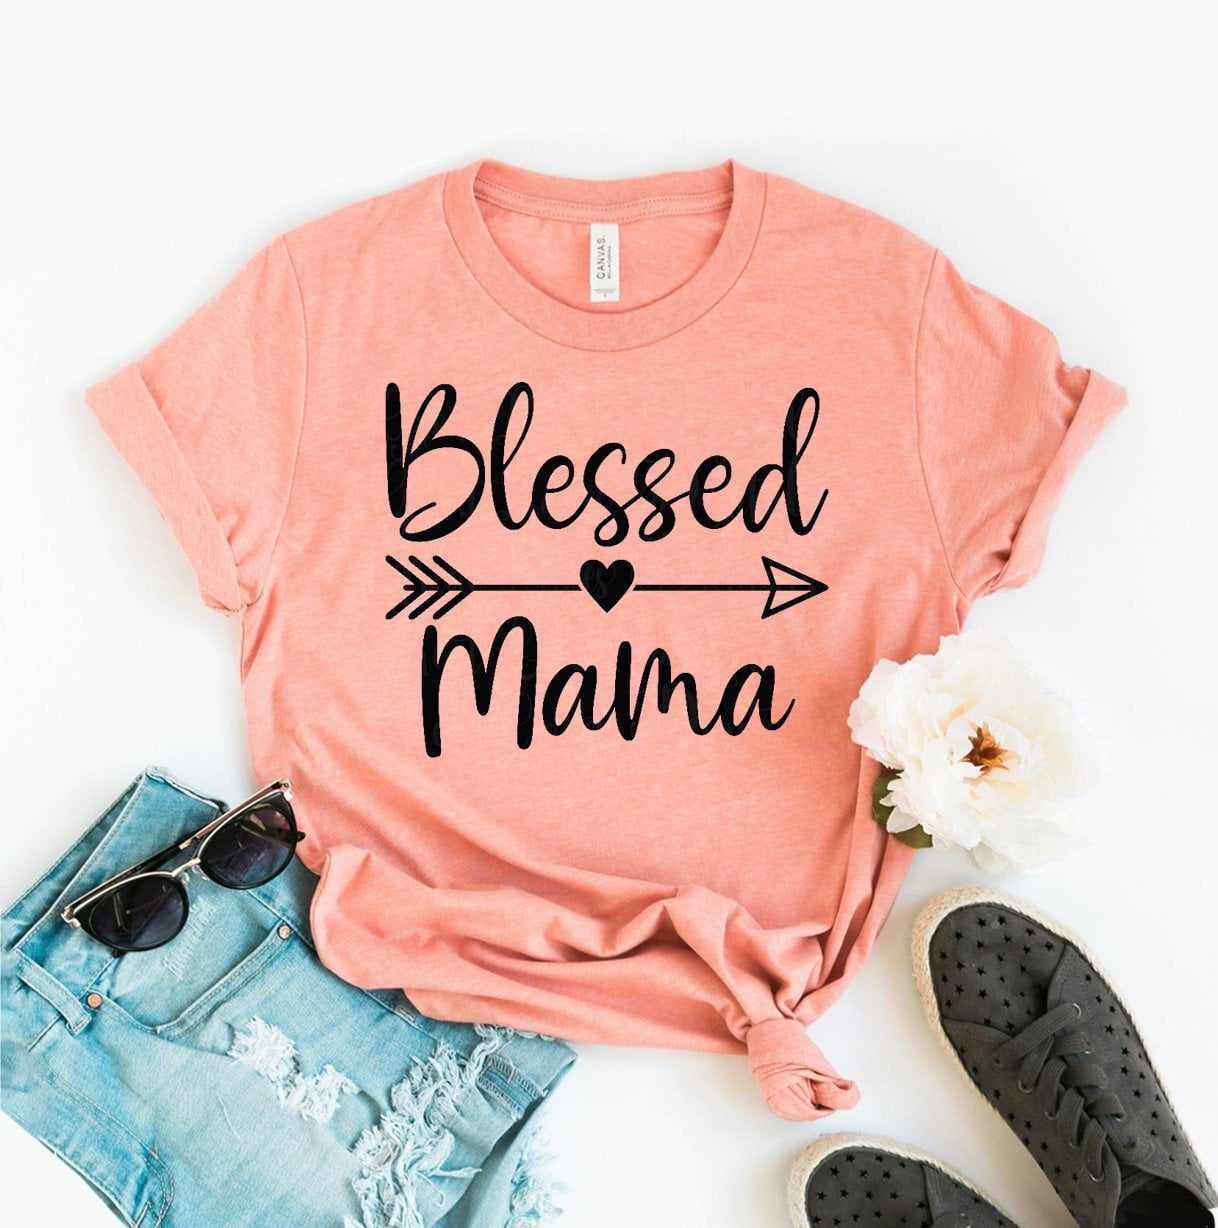 Blessed Mama T Shirt Mother S Day Tshirt Mom Life T Motherhood Top Women S Faith Tee